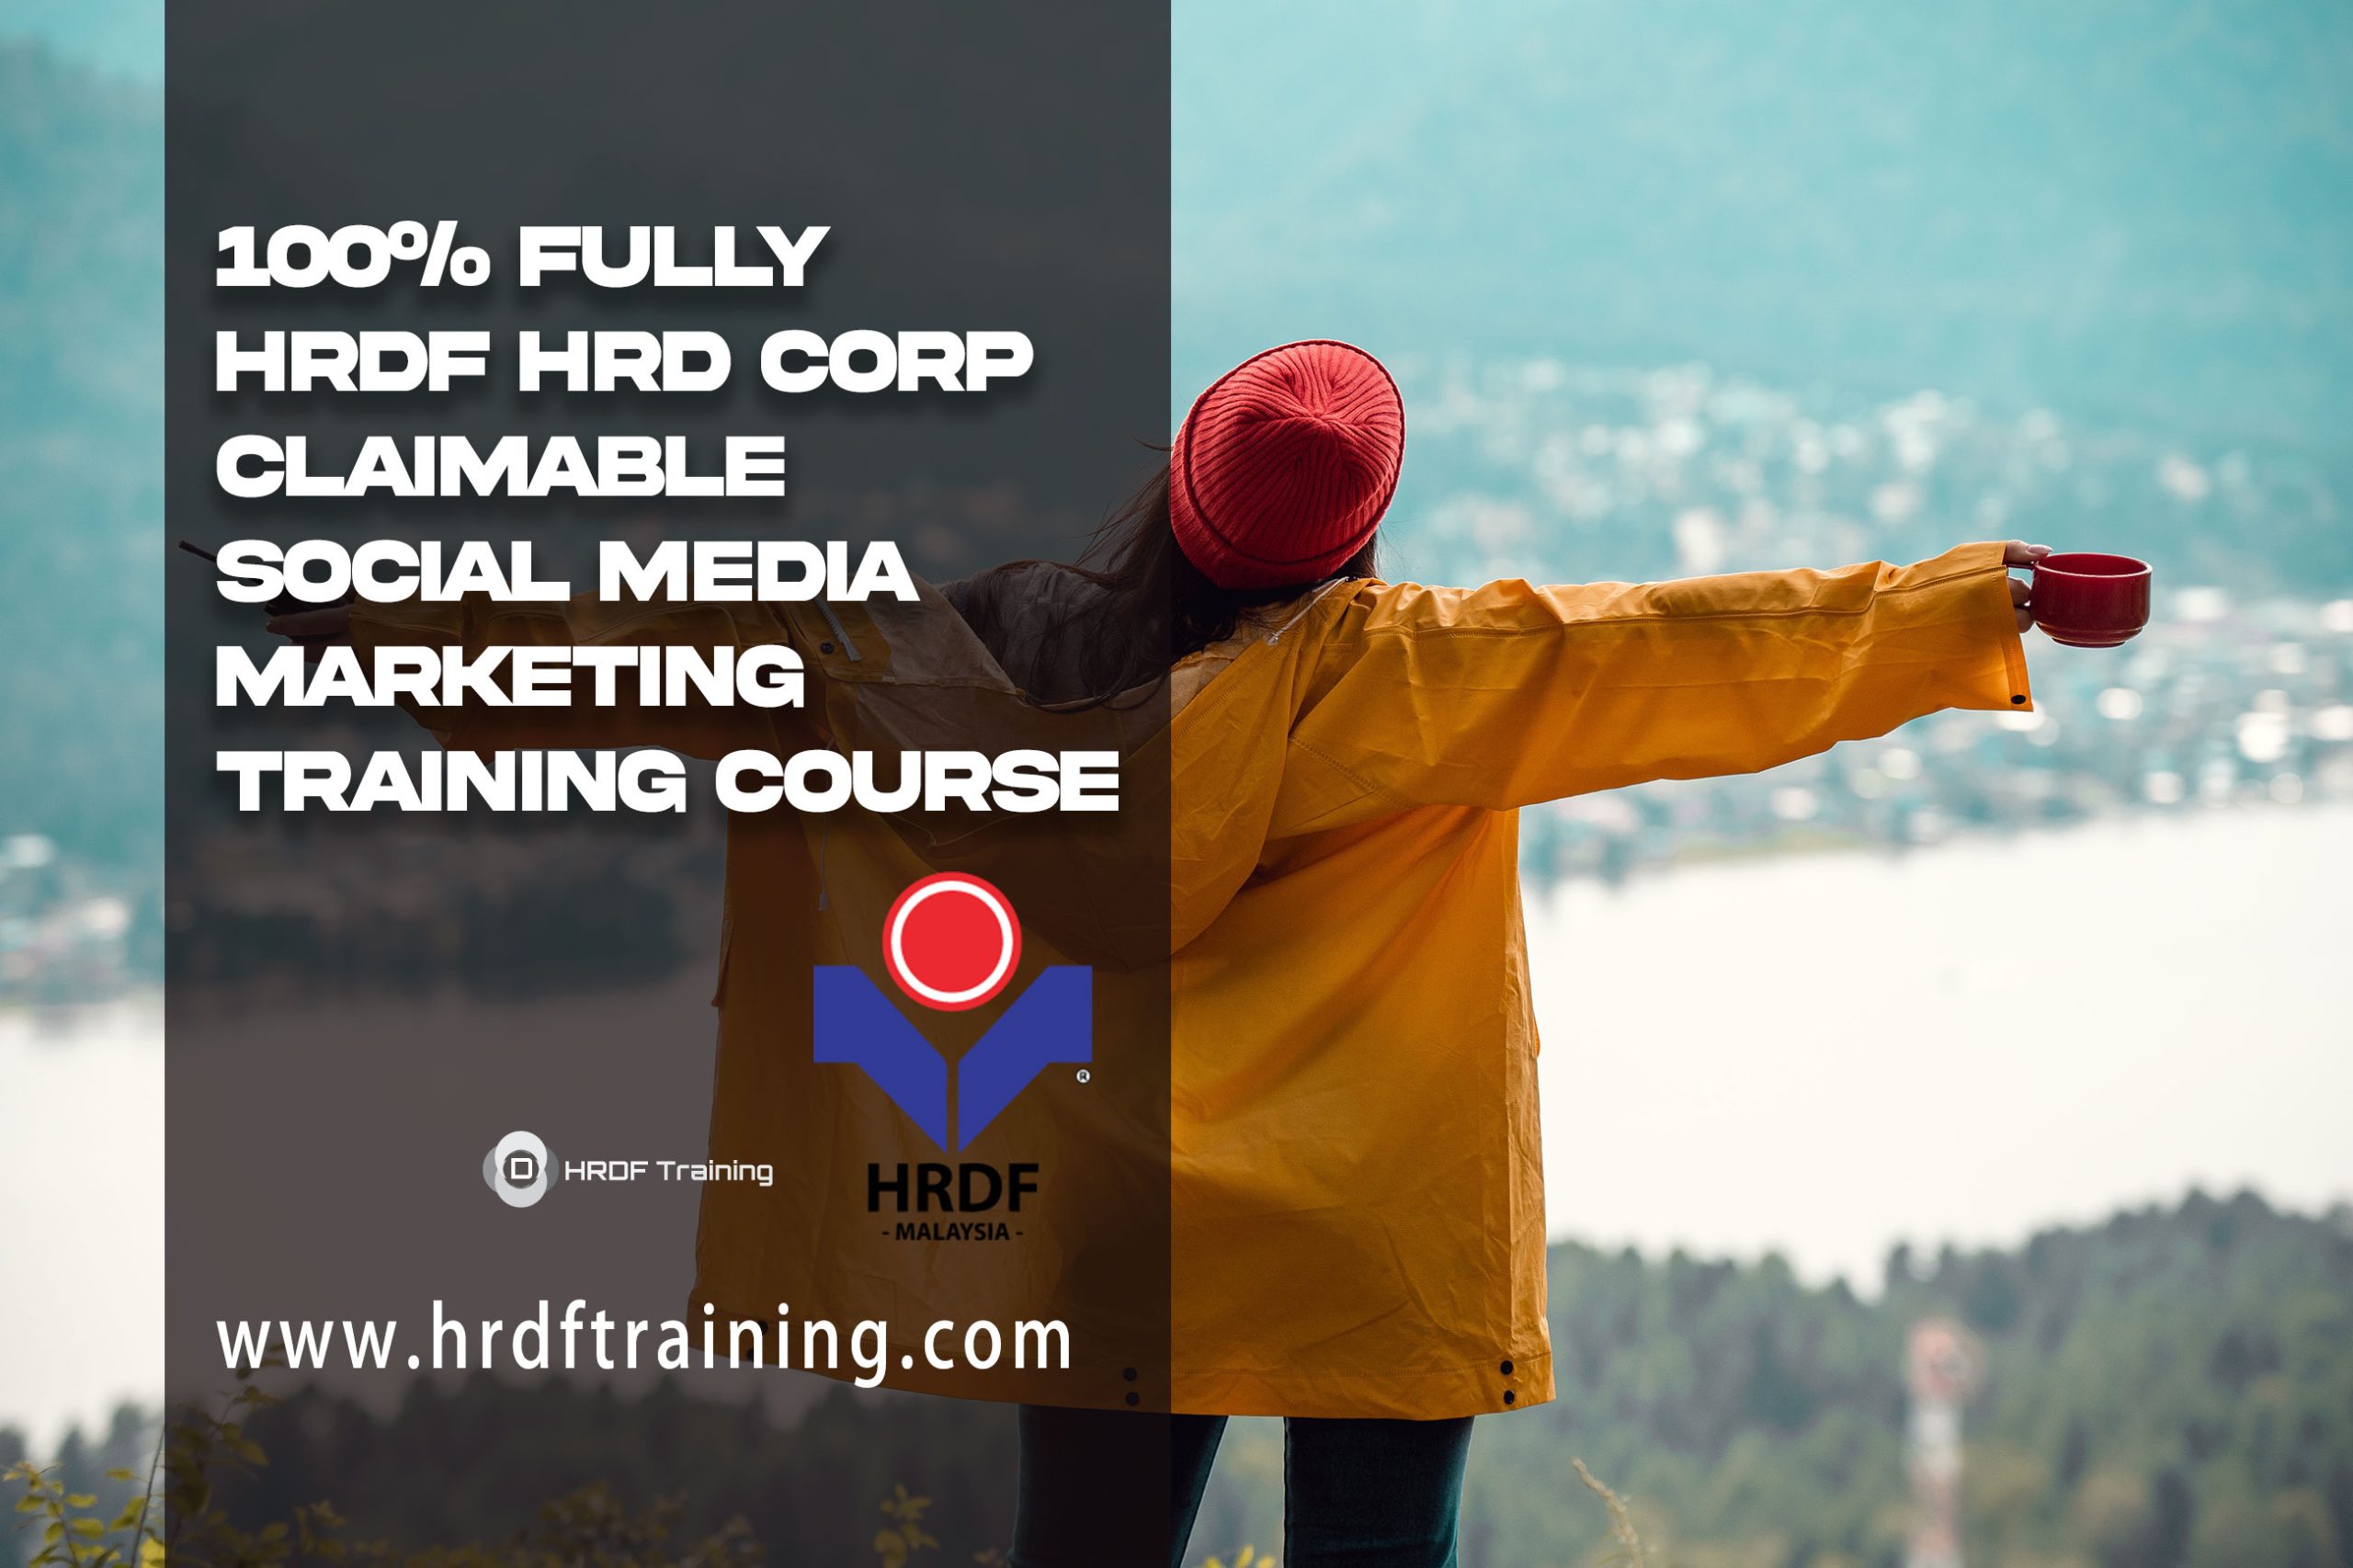 HRDF HRD Corp Claimable Social Media Marketing Training Course - March 2022